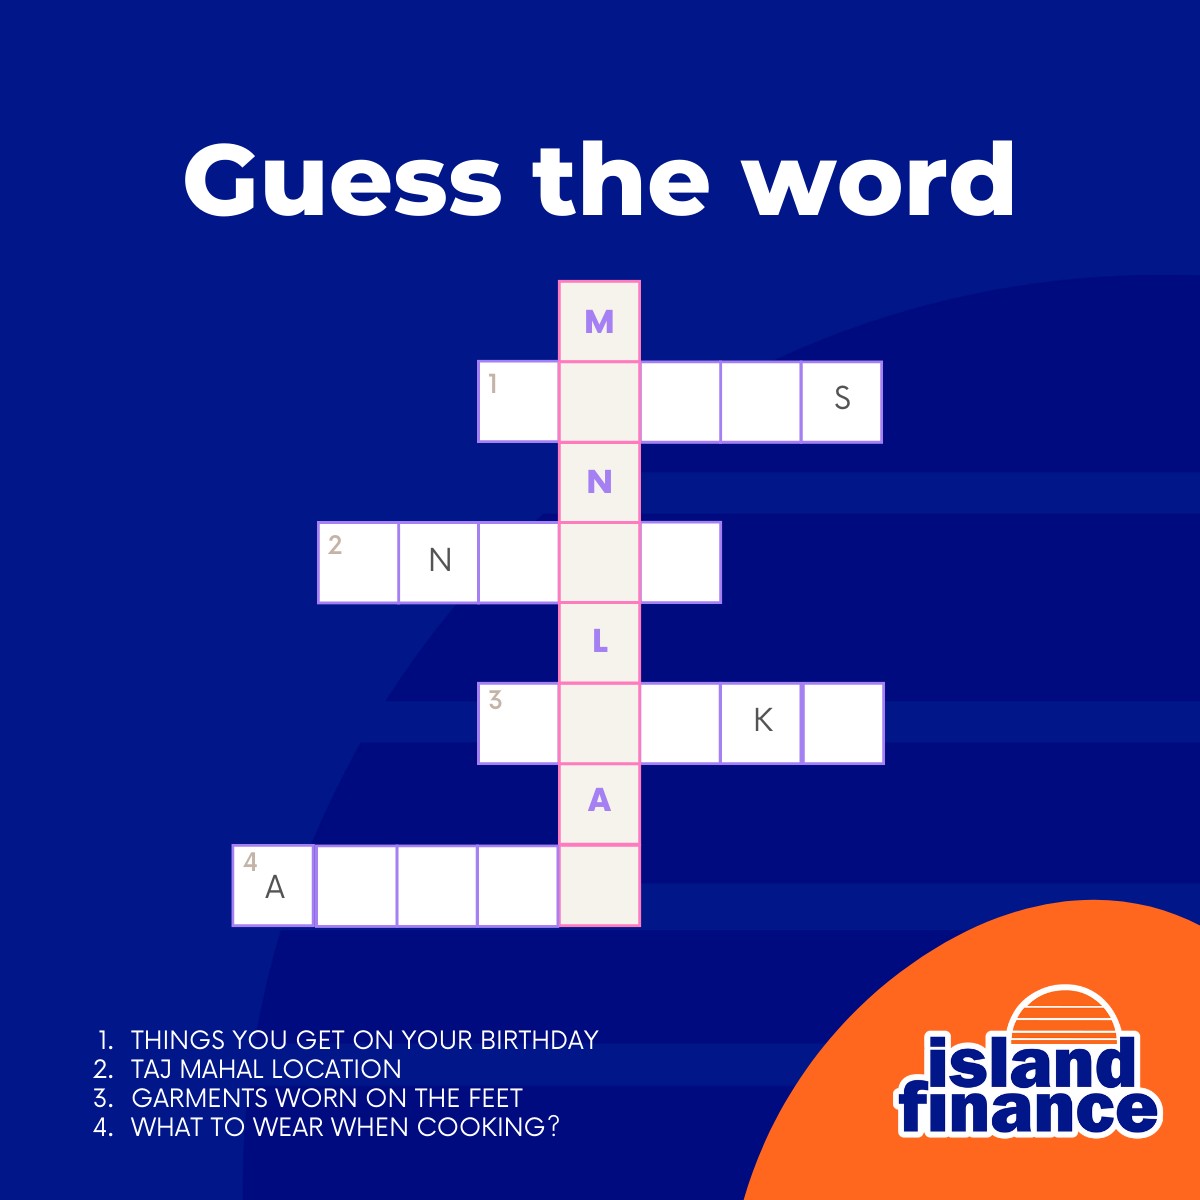 Complete the challenge and share your answer in the comments! 😊
#BrainChallenge #Game #IslandFinanceBonaire